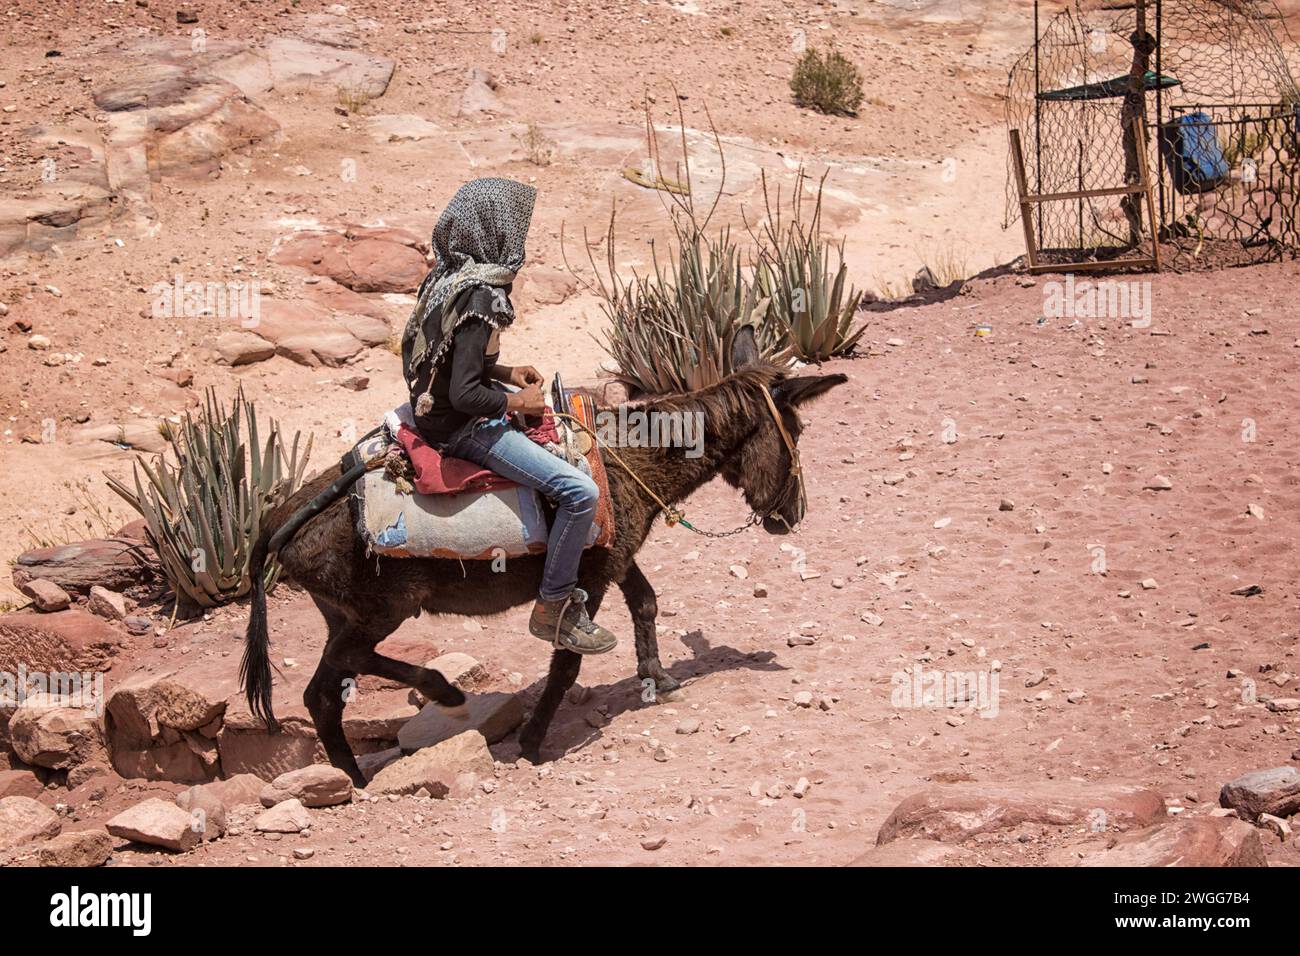 A young male riding a donkey. Petra, is a historic and archaeological city in southern Jordan. Famous for its rock-cut architecture and water conduit system, Petra is also called the 'Rose City' because of the colour of the sandstone from which it is carved. It is adjacent to the mountain of Jabal Al-Madbah, in a basin surrounded by mountains forming the eastern flank of the Arabah valley running from the Dead Sea to the Gulf of Aqaba. Access to the city is through a famously picturesque gorge called the Siq, which leads directly to the Khazneh. Jordon. Stock Photo